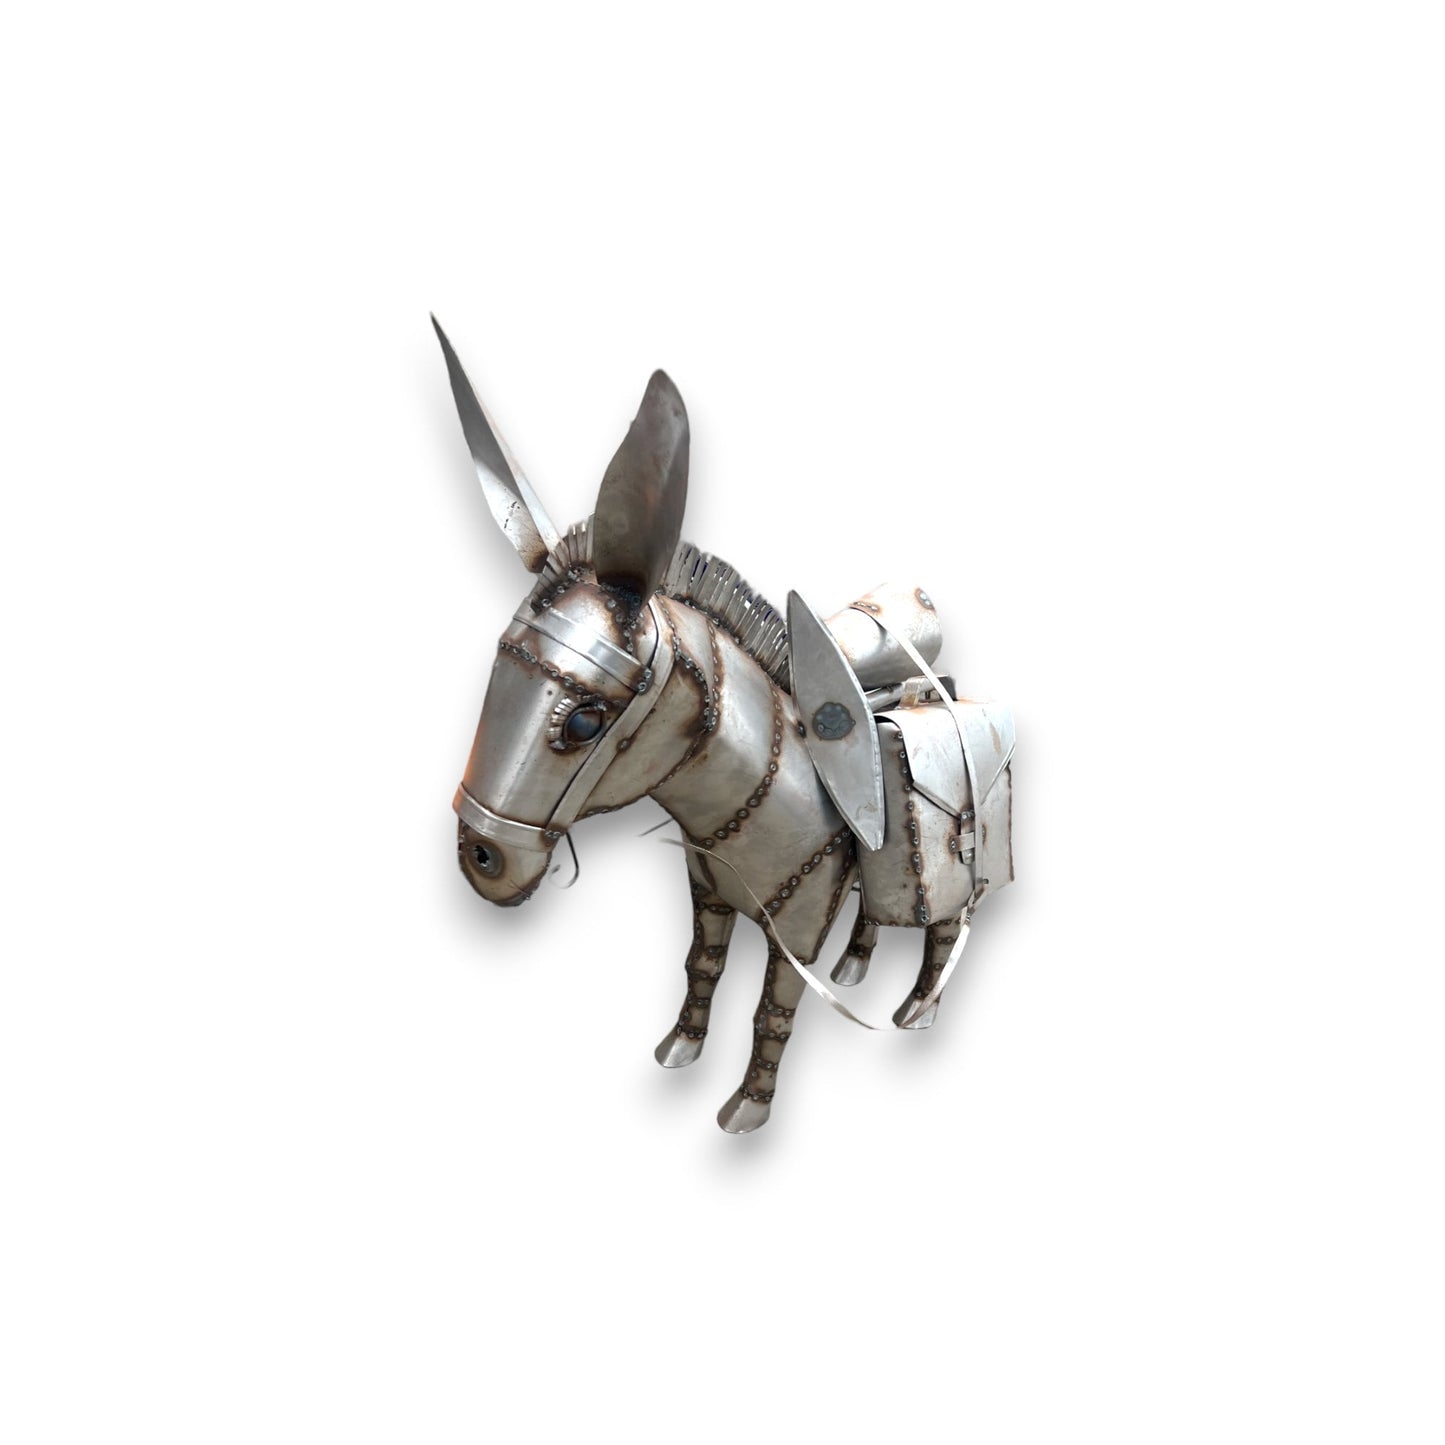 Whimsical Metal Donkey Statue | Handcrafted 3-Foot Tall Mexican Welded Sculpture